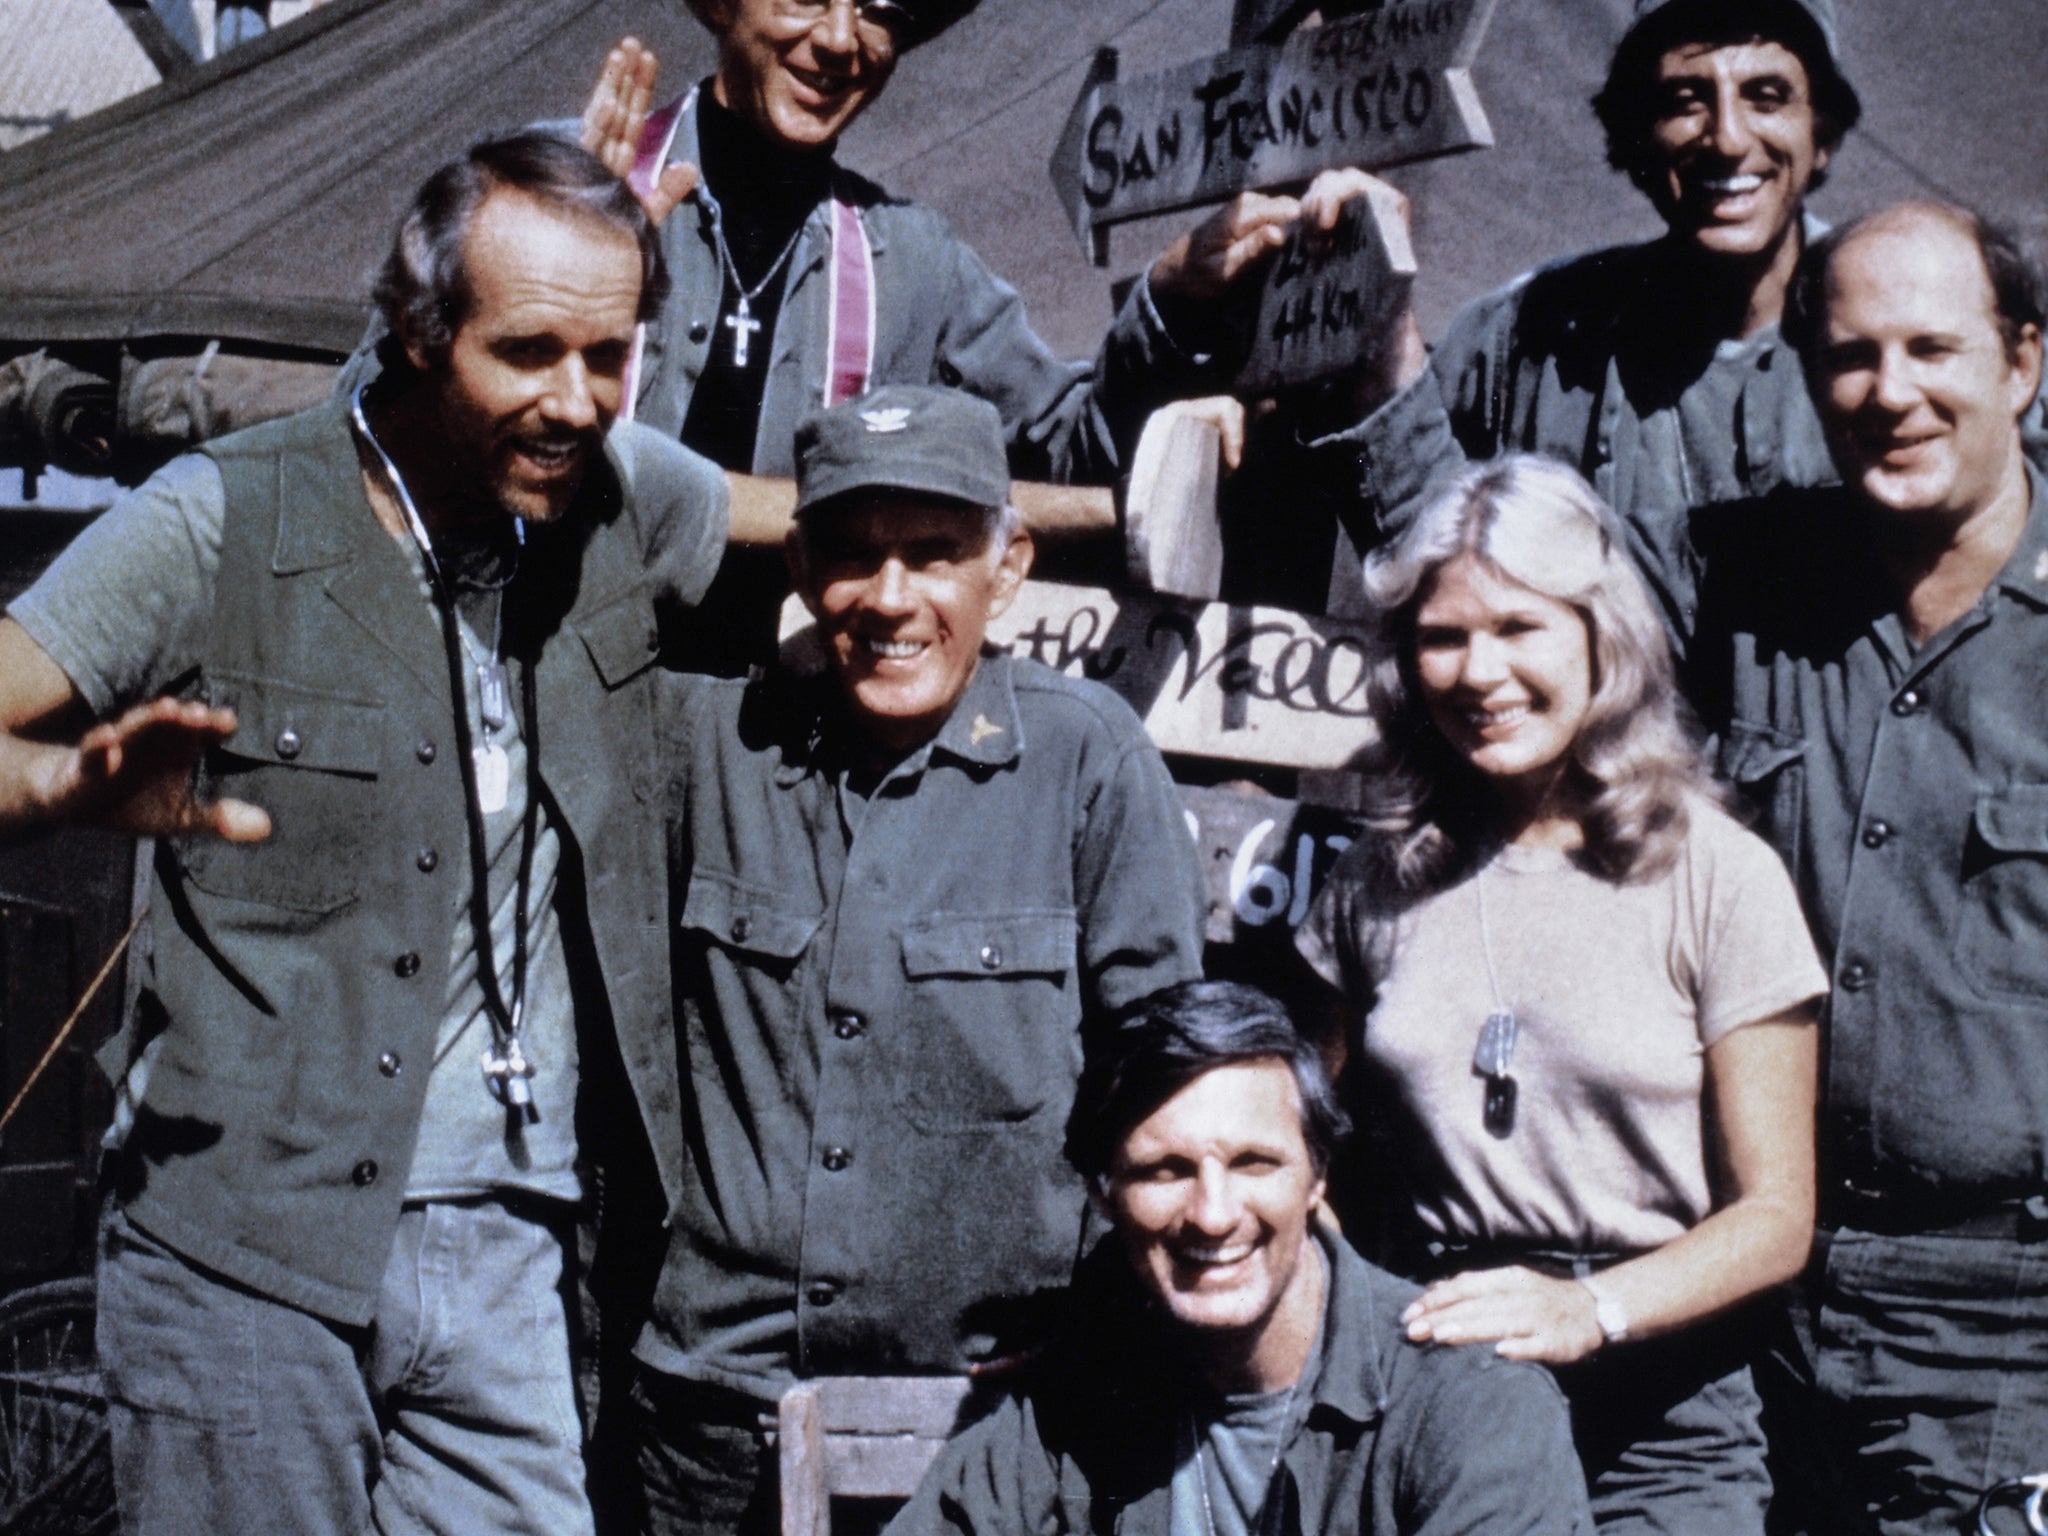 Alda appeared in over 250 episodes of ‘M*A*S*H’, more than any other actor